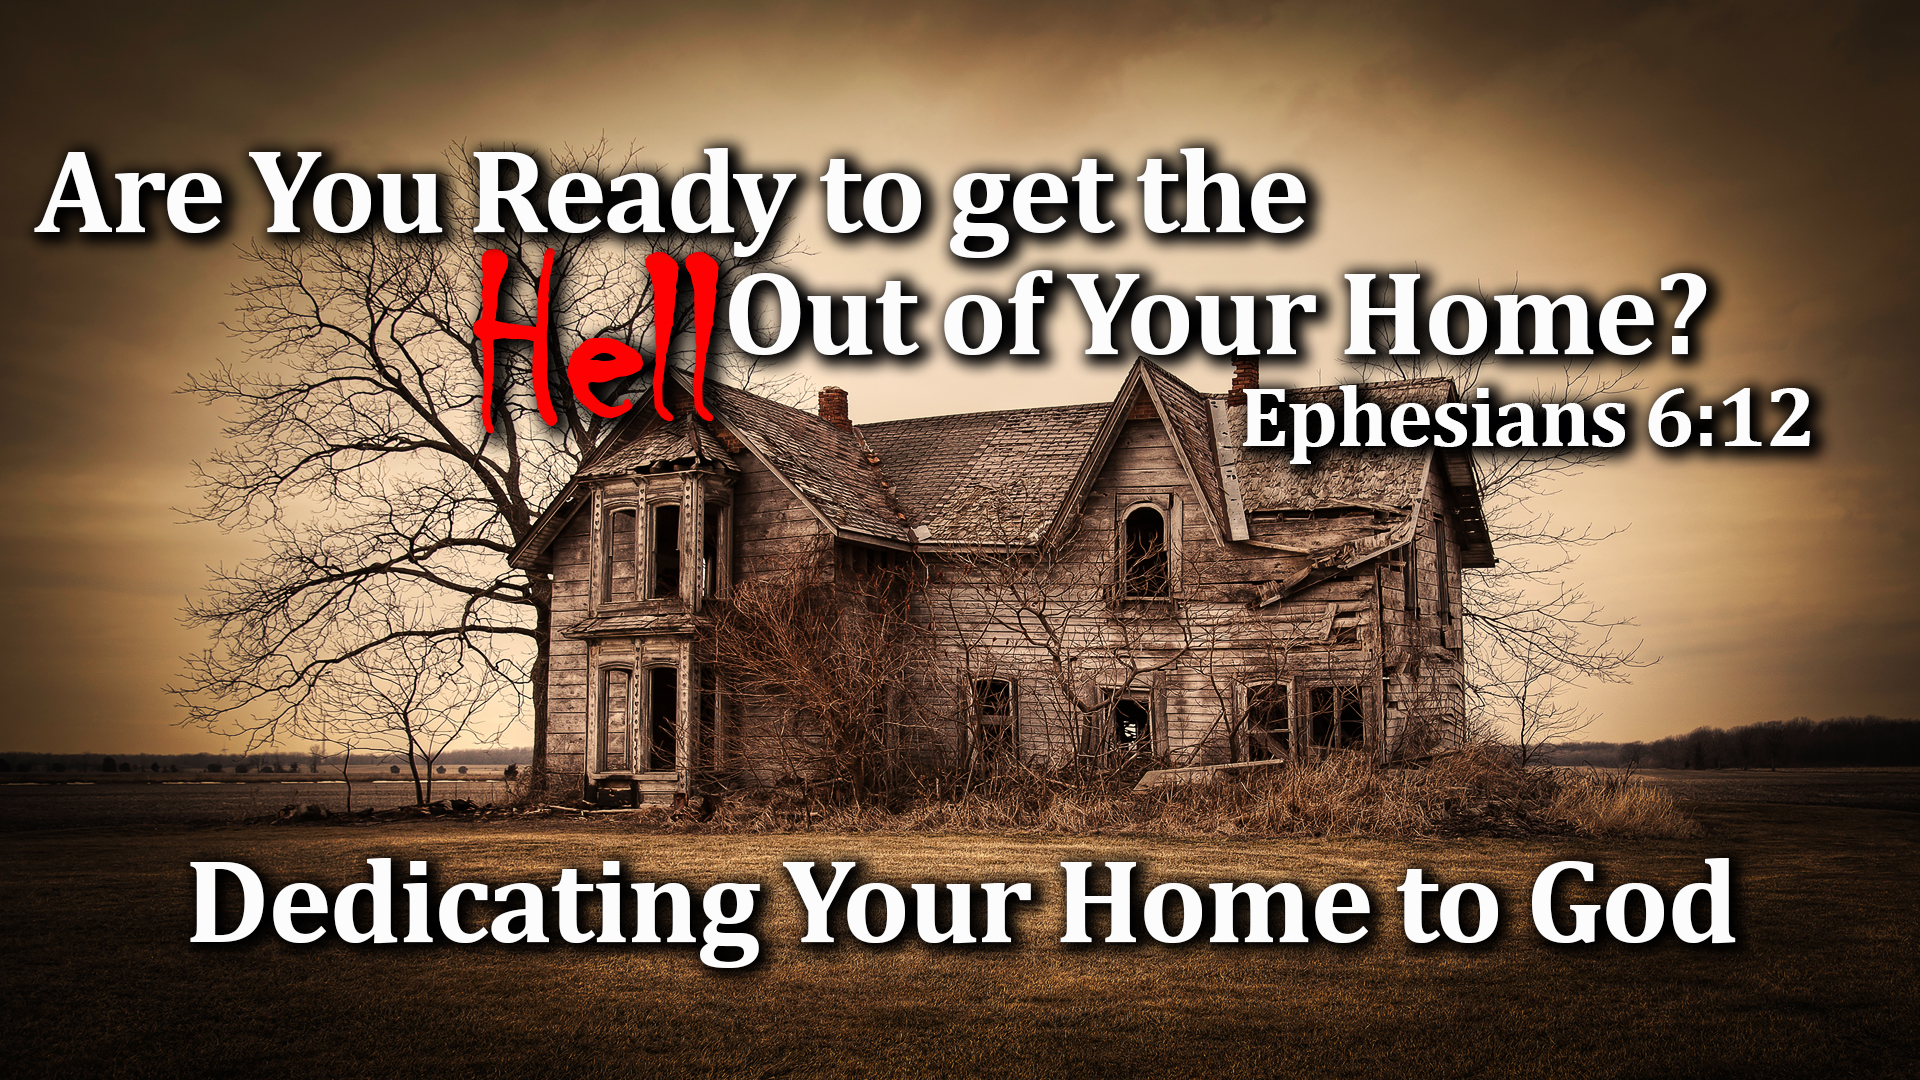 05-17-22 Are You Ready to Get the Hell out of Your Home Dedicating Your Home to God